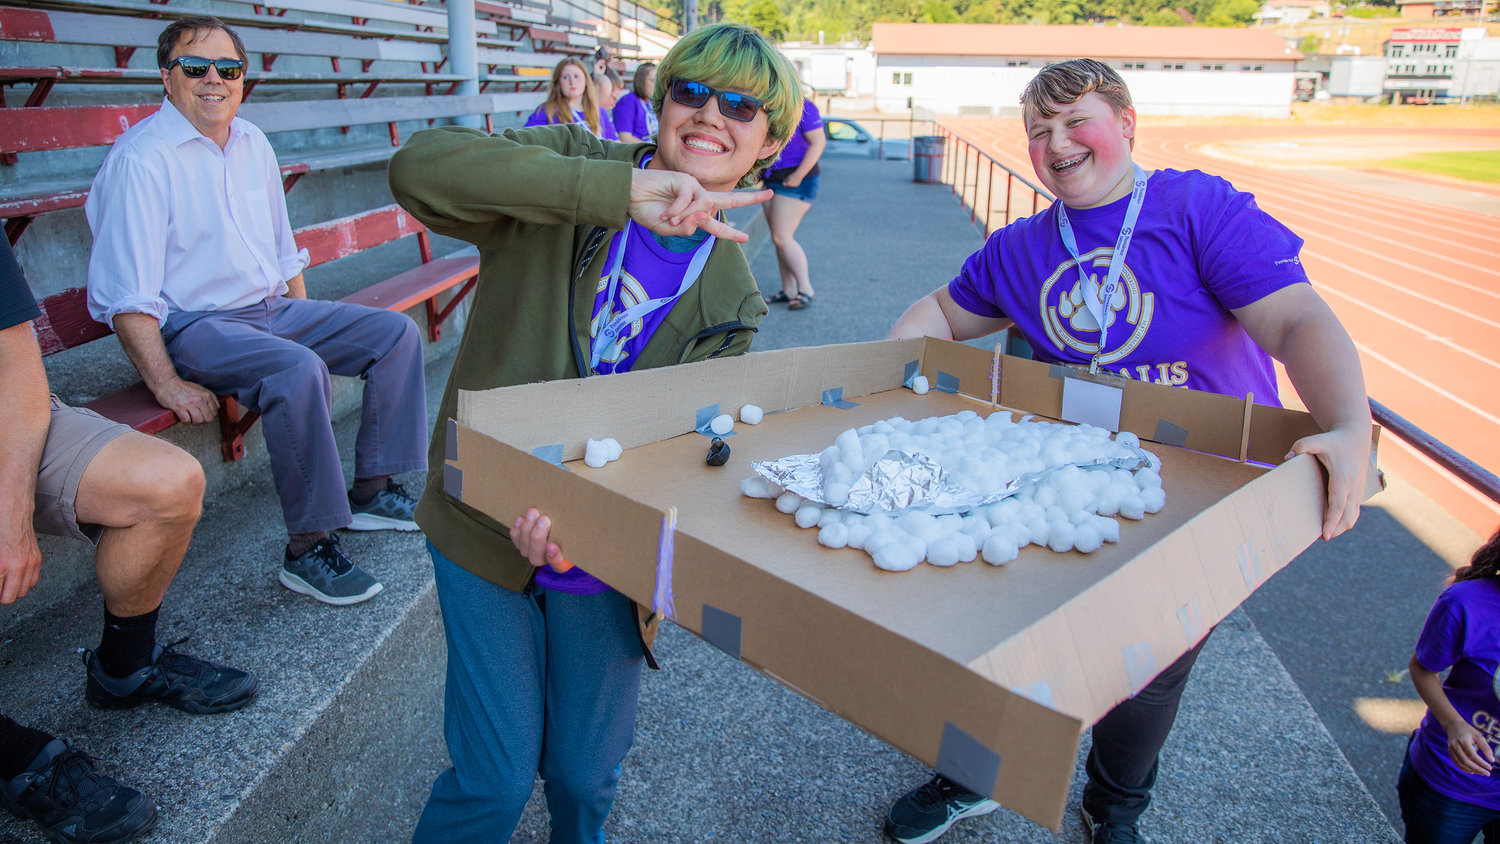 Ethan Ondong, from Napavine High School, and Sam Campagna, from W.F. West, smile for a photo with their landing pad Tuesday in Chehalis at Bearcat Stadium.